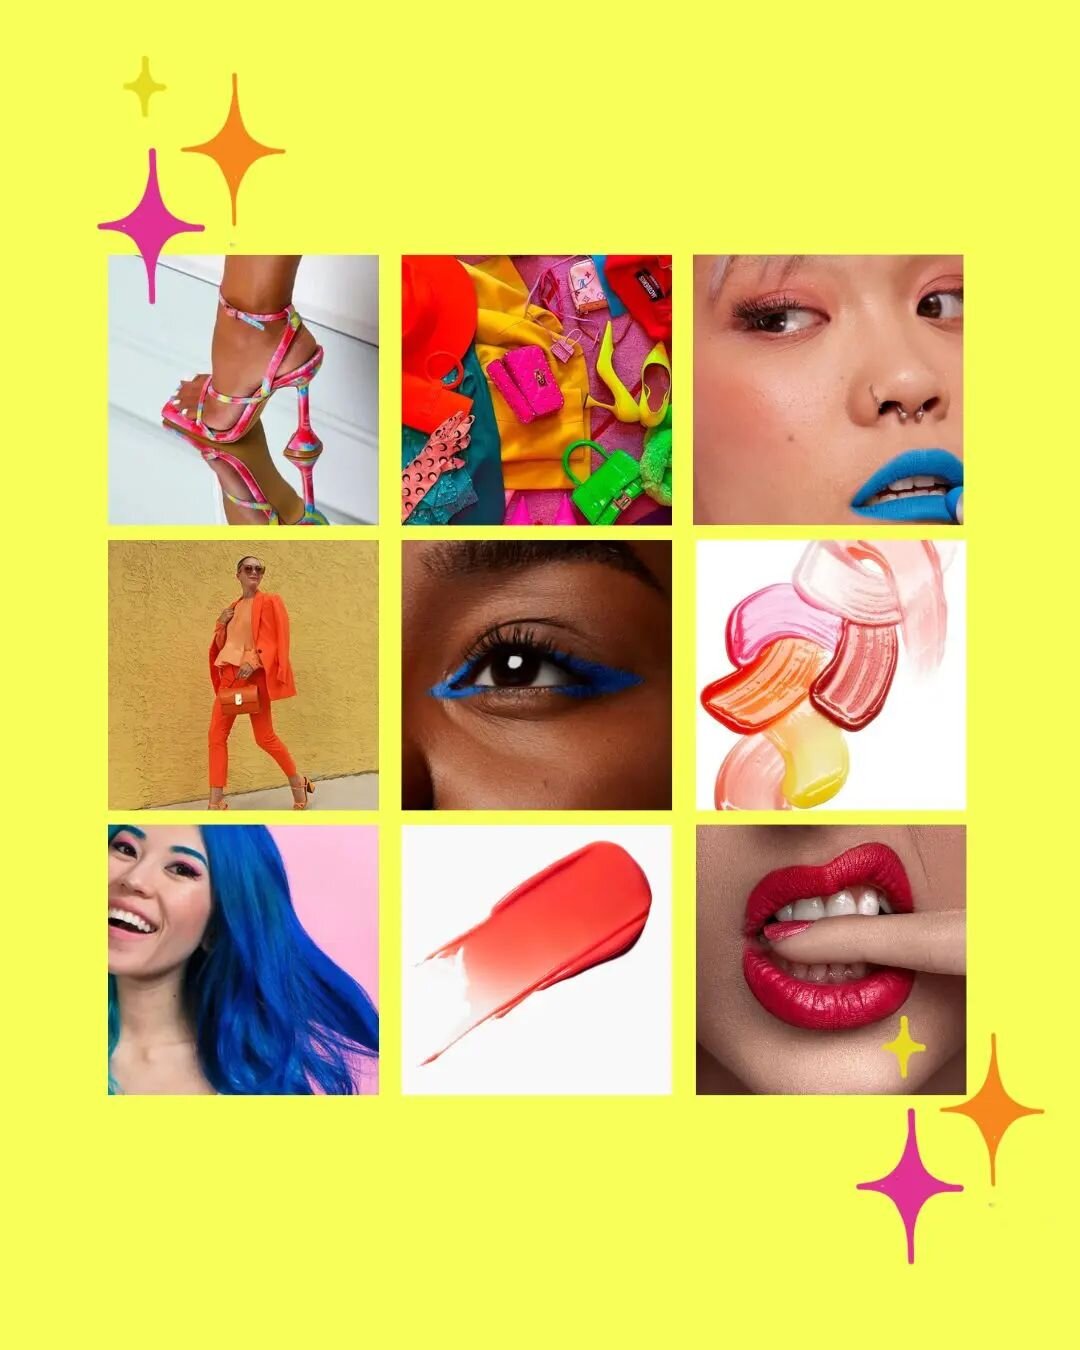 Mood board for brand Spark. A beauty brand that's aims to set women alight and ooze with confidence and positive  vibes. I hope you like it 
.
.
.
.
.
.
.
.
.

#moodboard #colourful #creativebusiness #creative #branding #brandstrategy #brand #beautyb